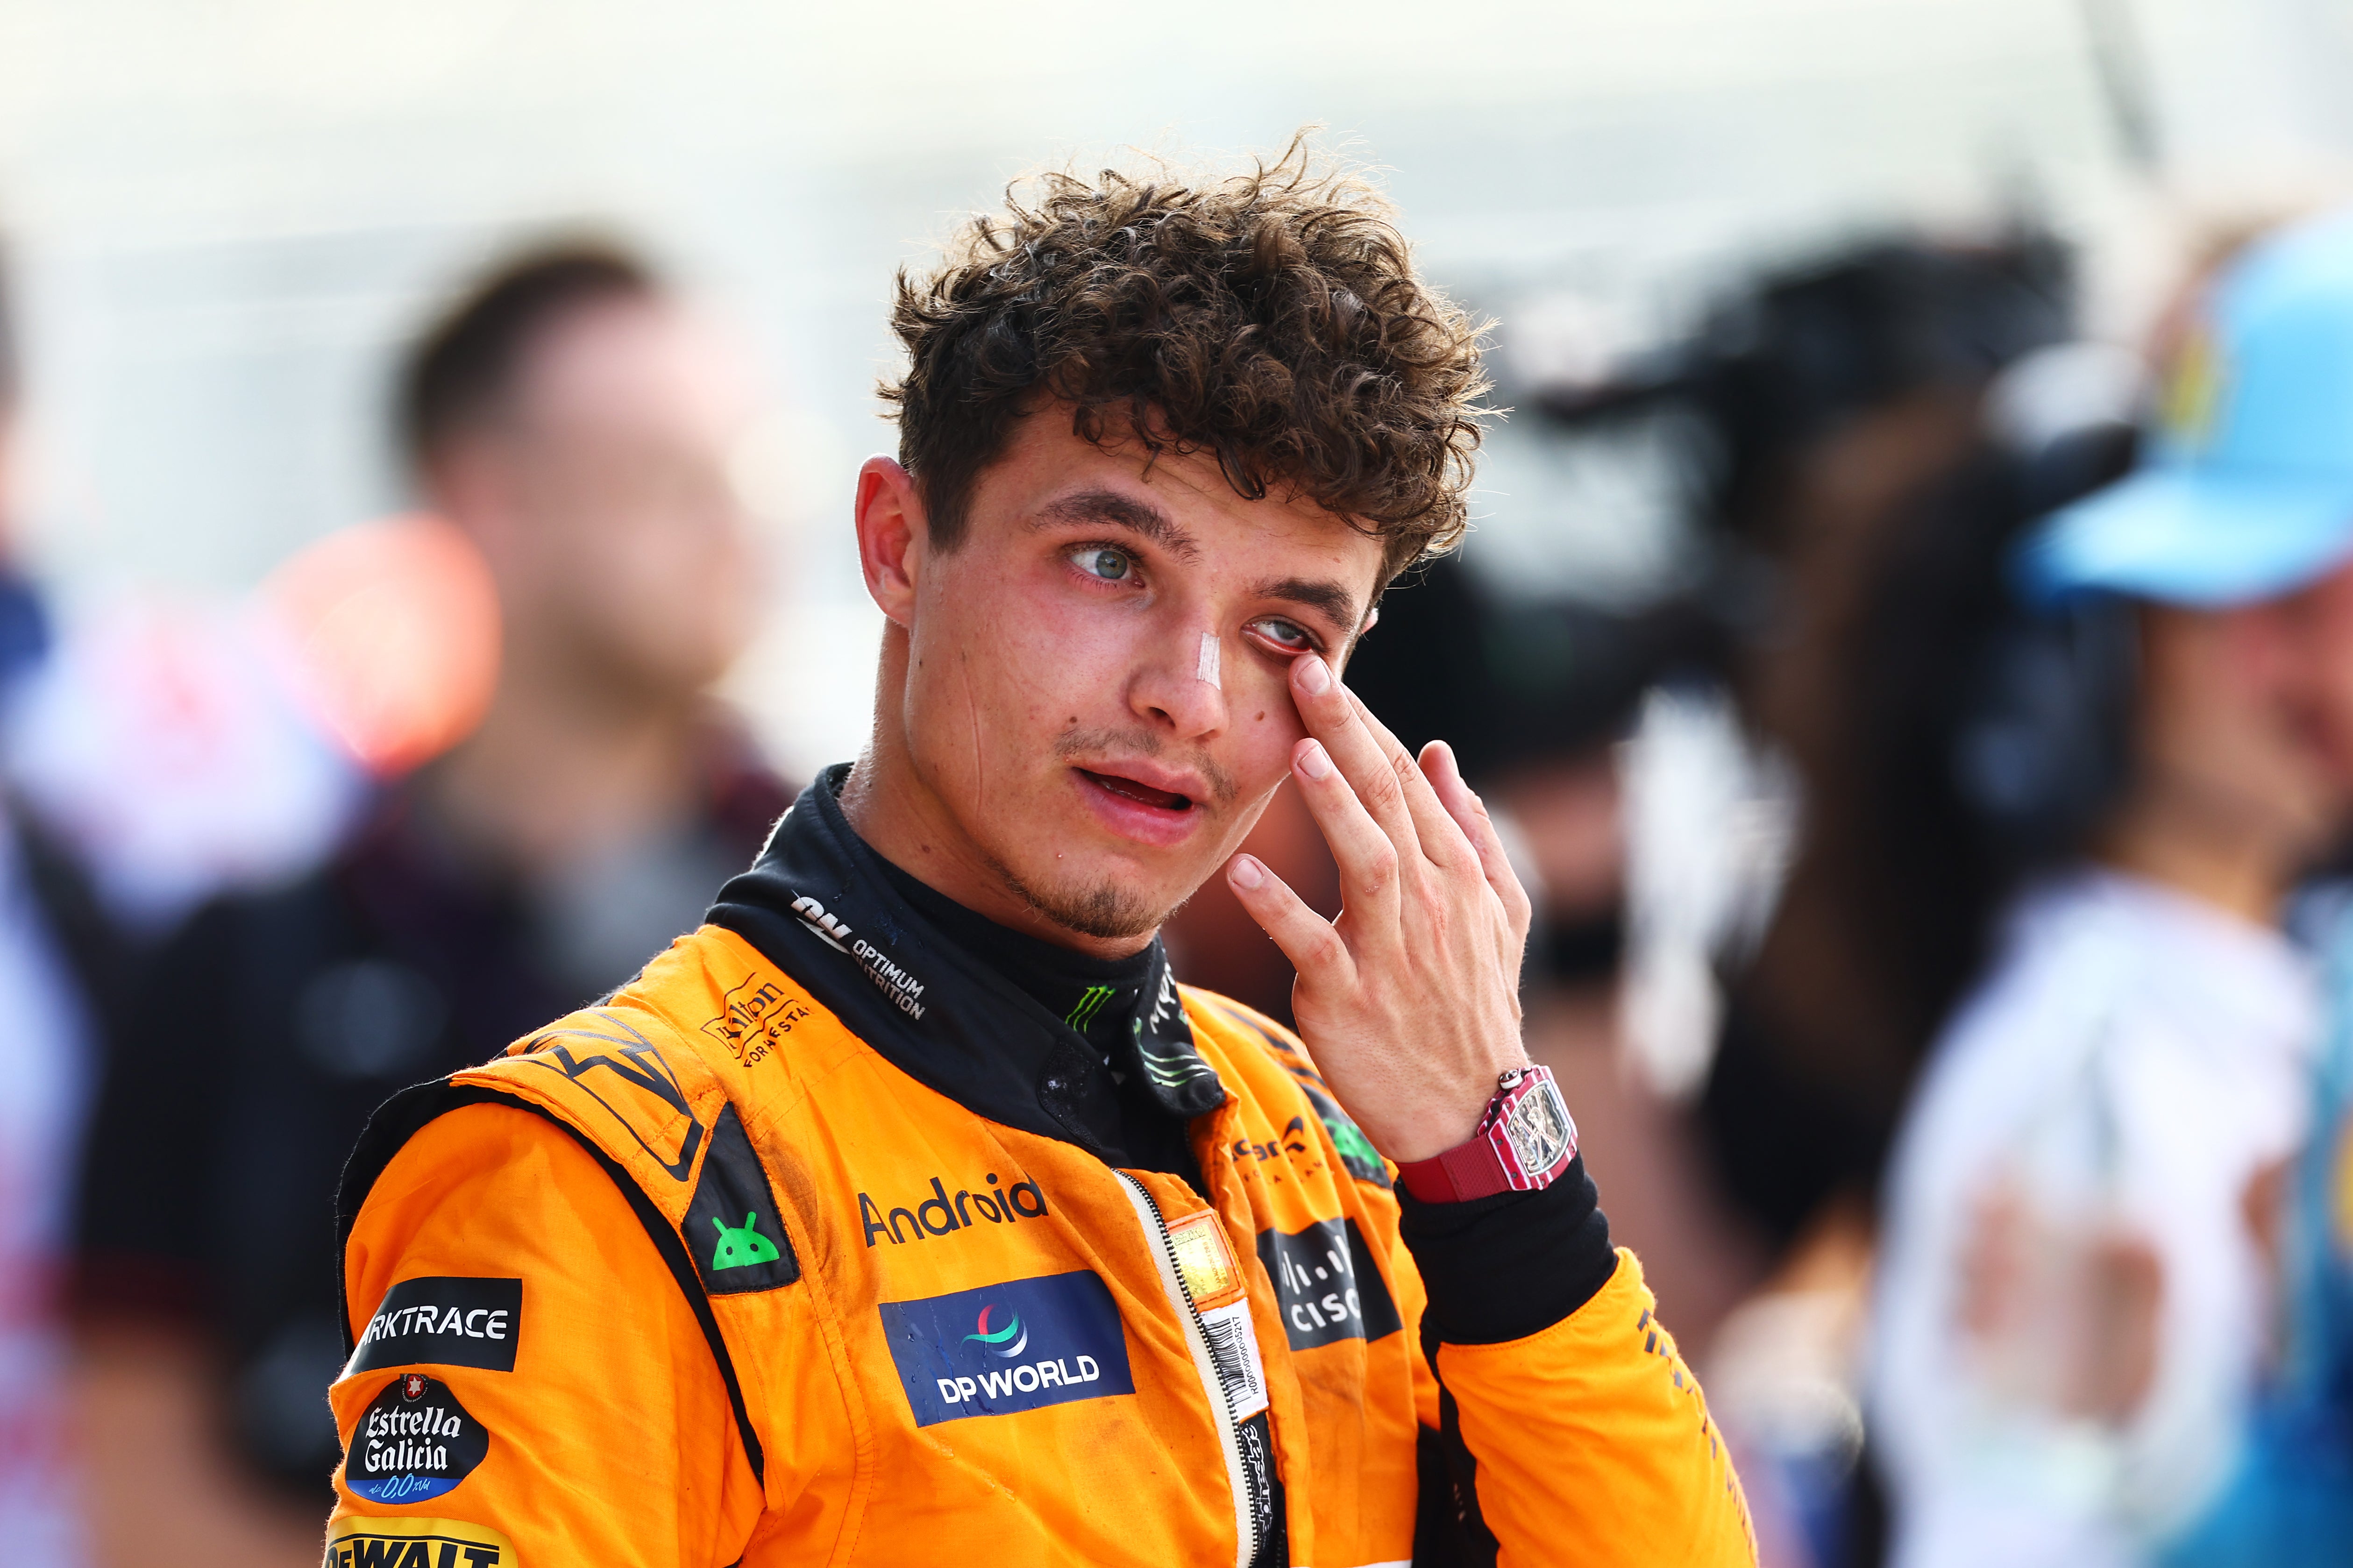 Lando Norris won his first ever F1 race in Miami on Sunday